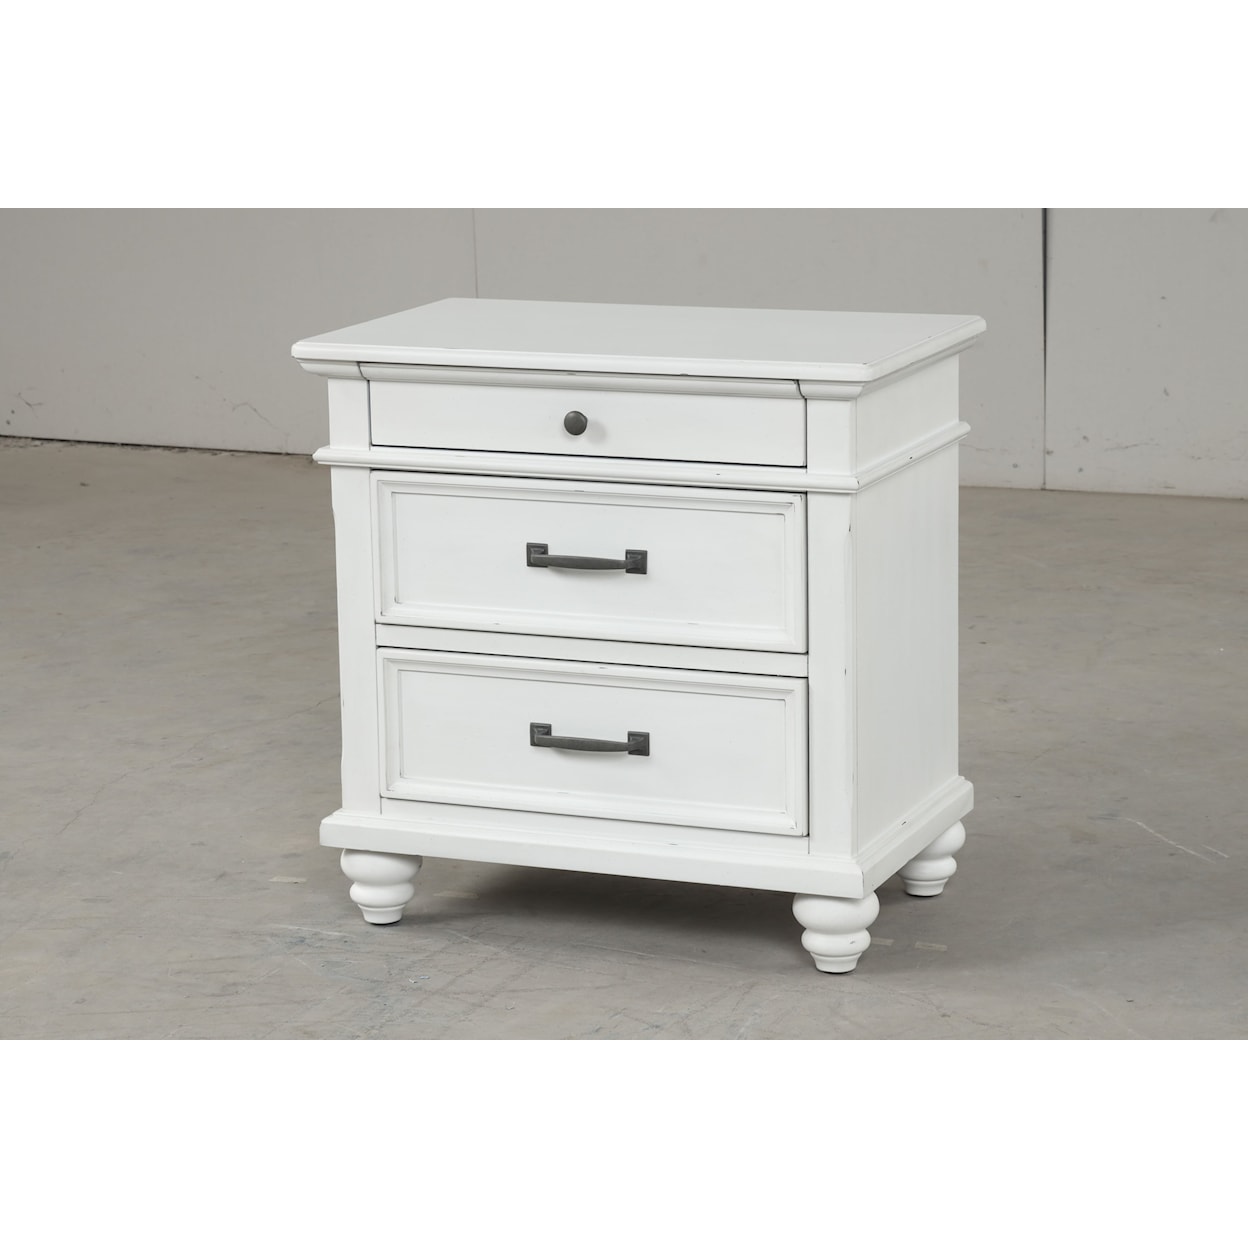 Alex's Furniture 8465A Nightstand W/ Full Extension Drawer Glides